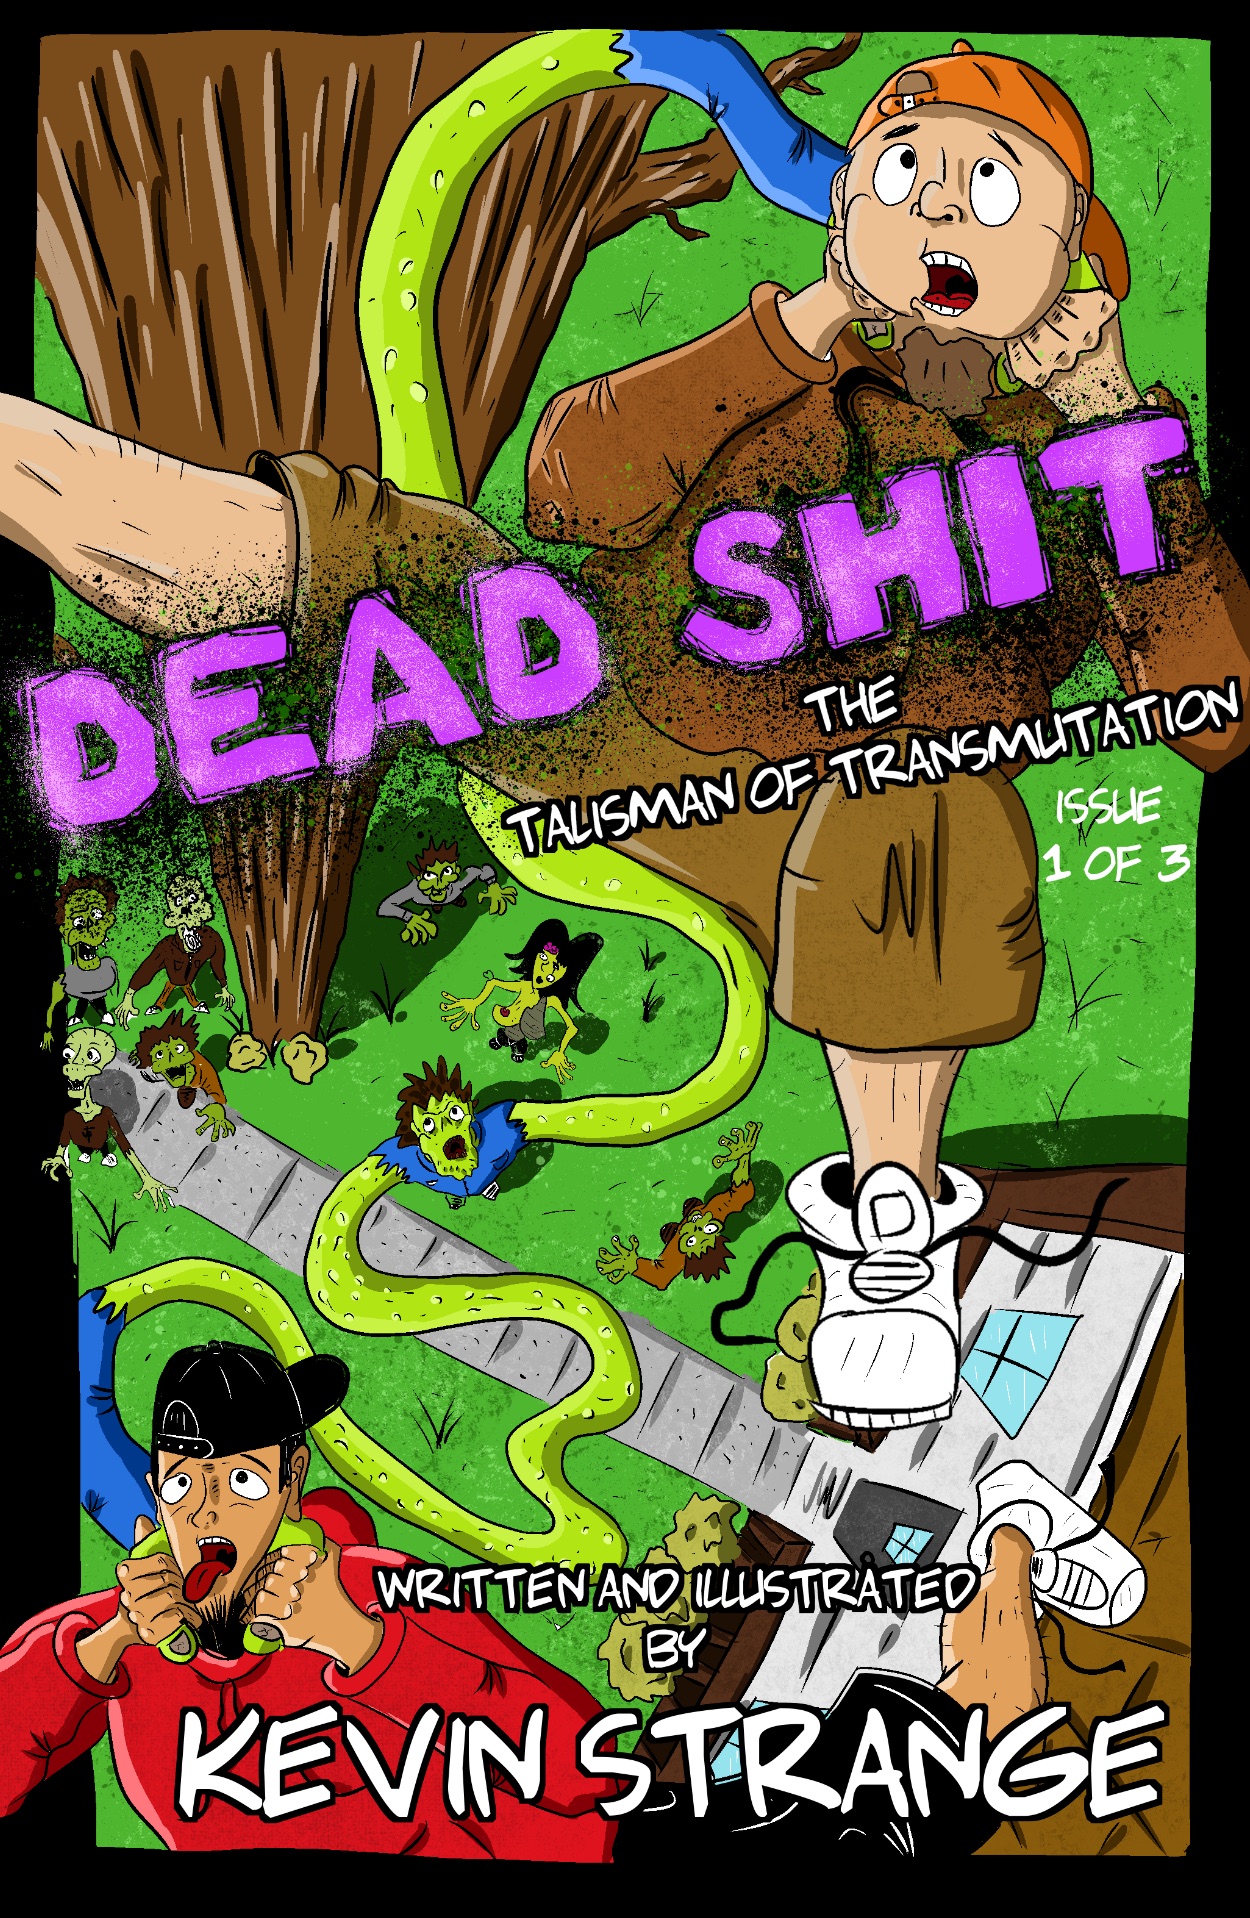 DEAD SHIT: THE COMIC BOOK Issue 1